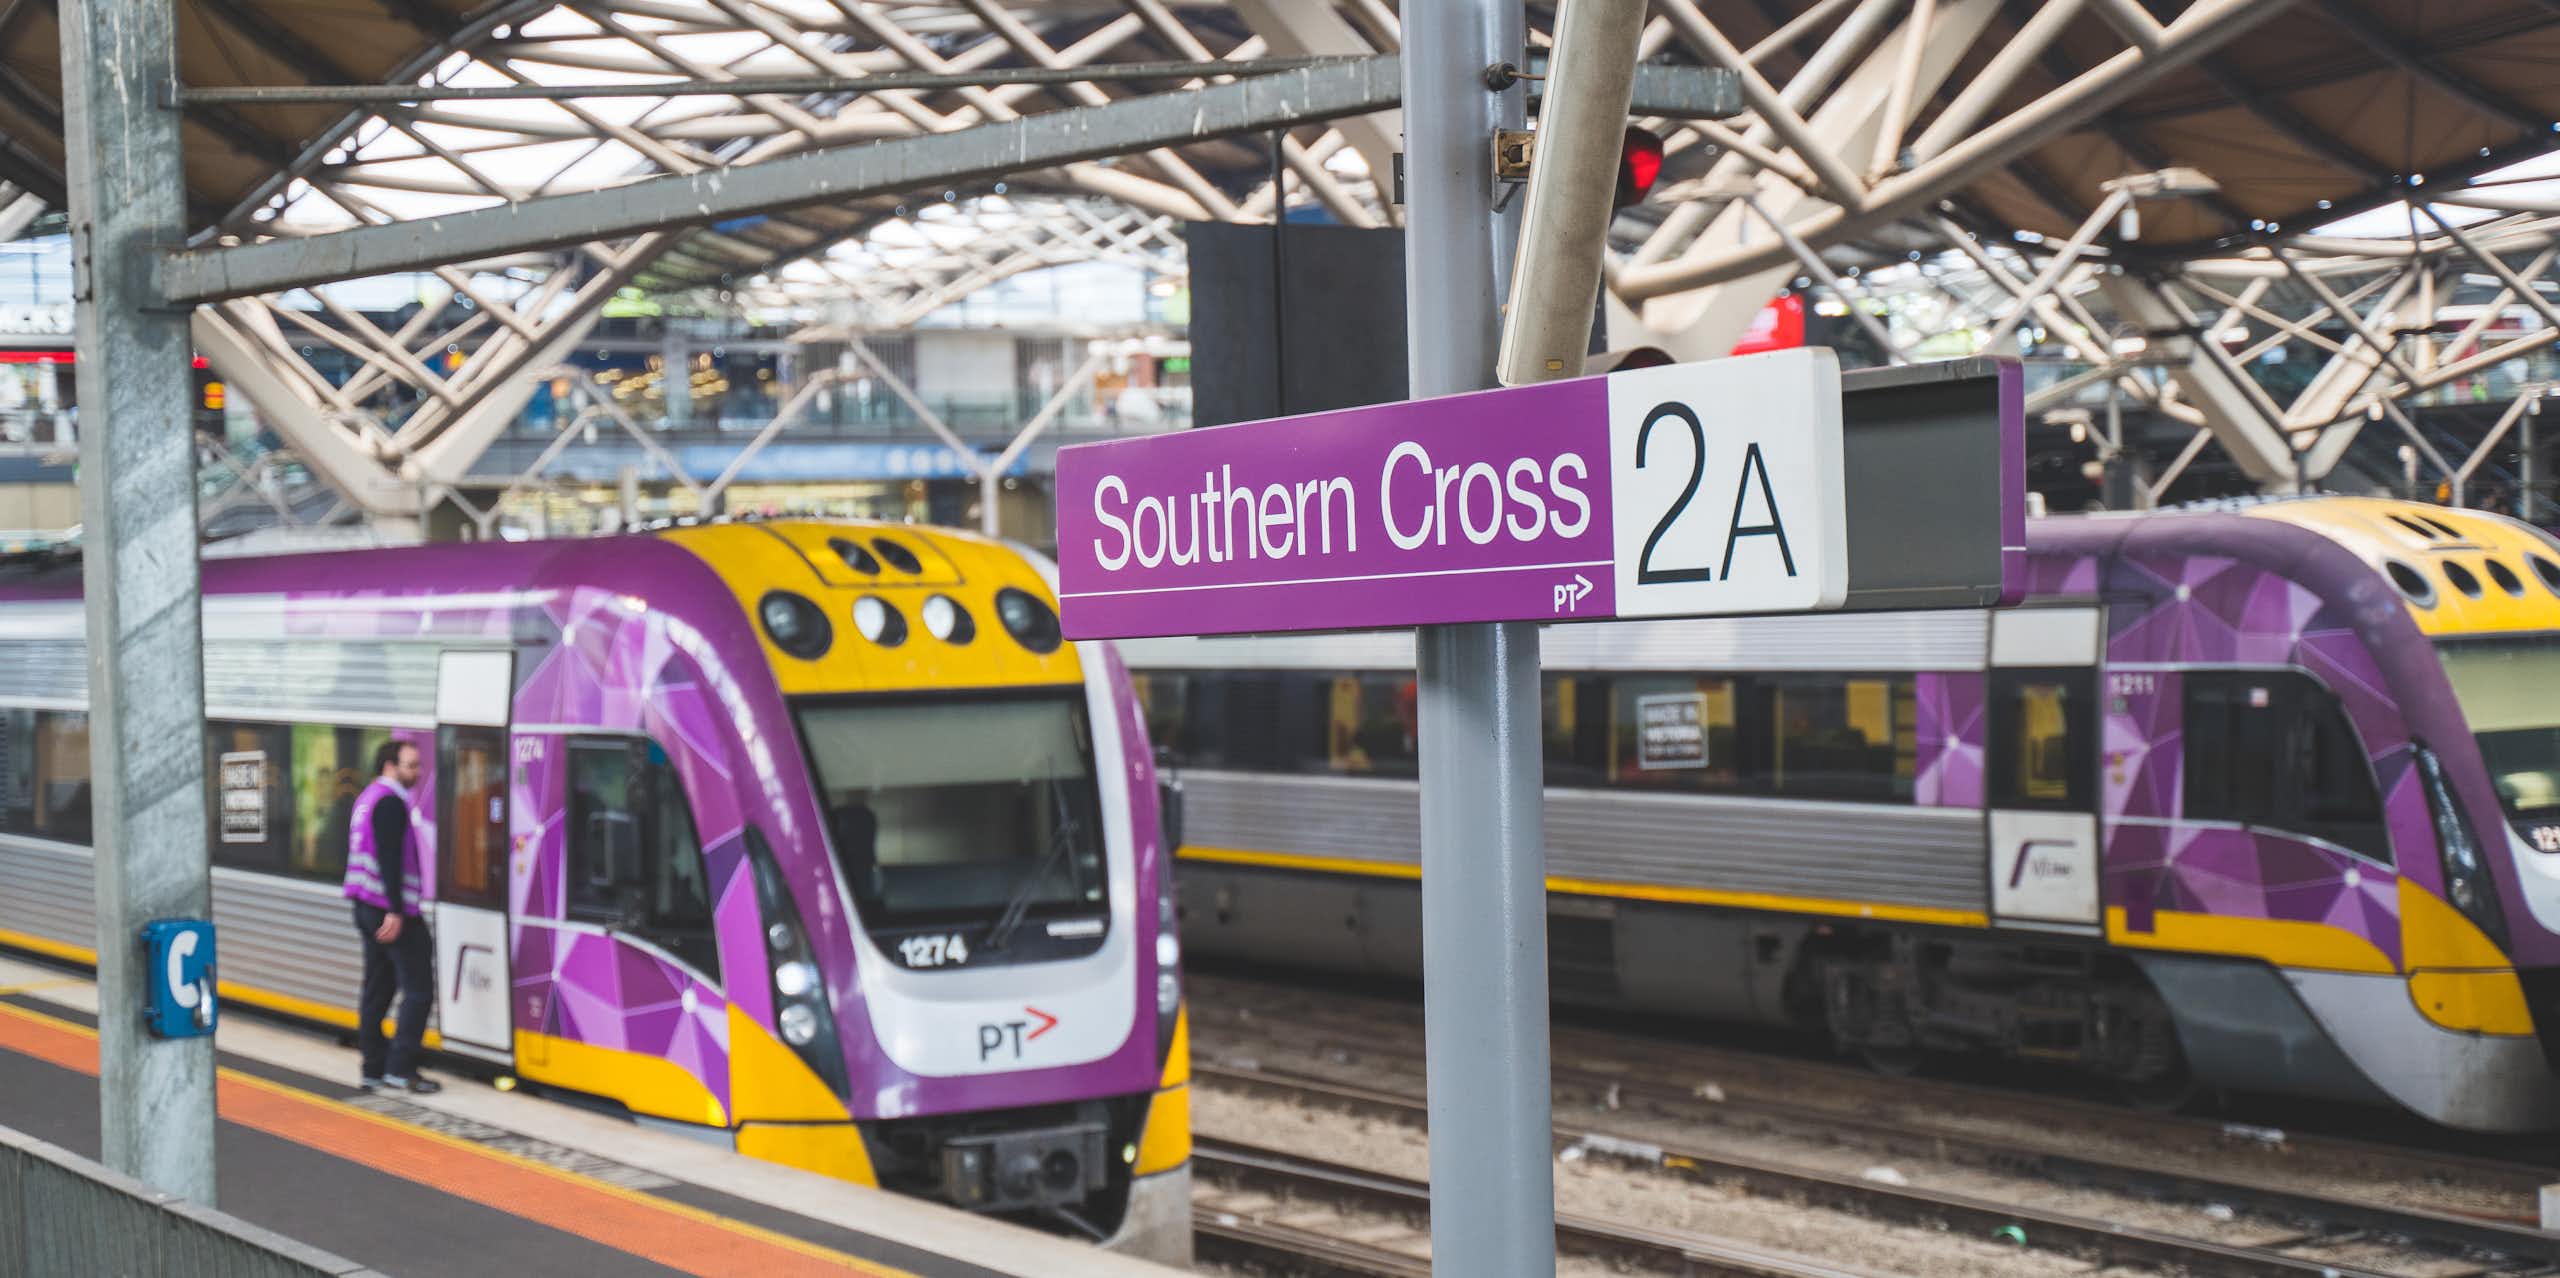 Two V/Line trains at platforms under the roof of Southern Cross Station